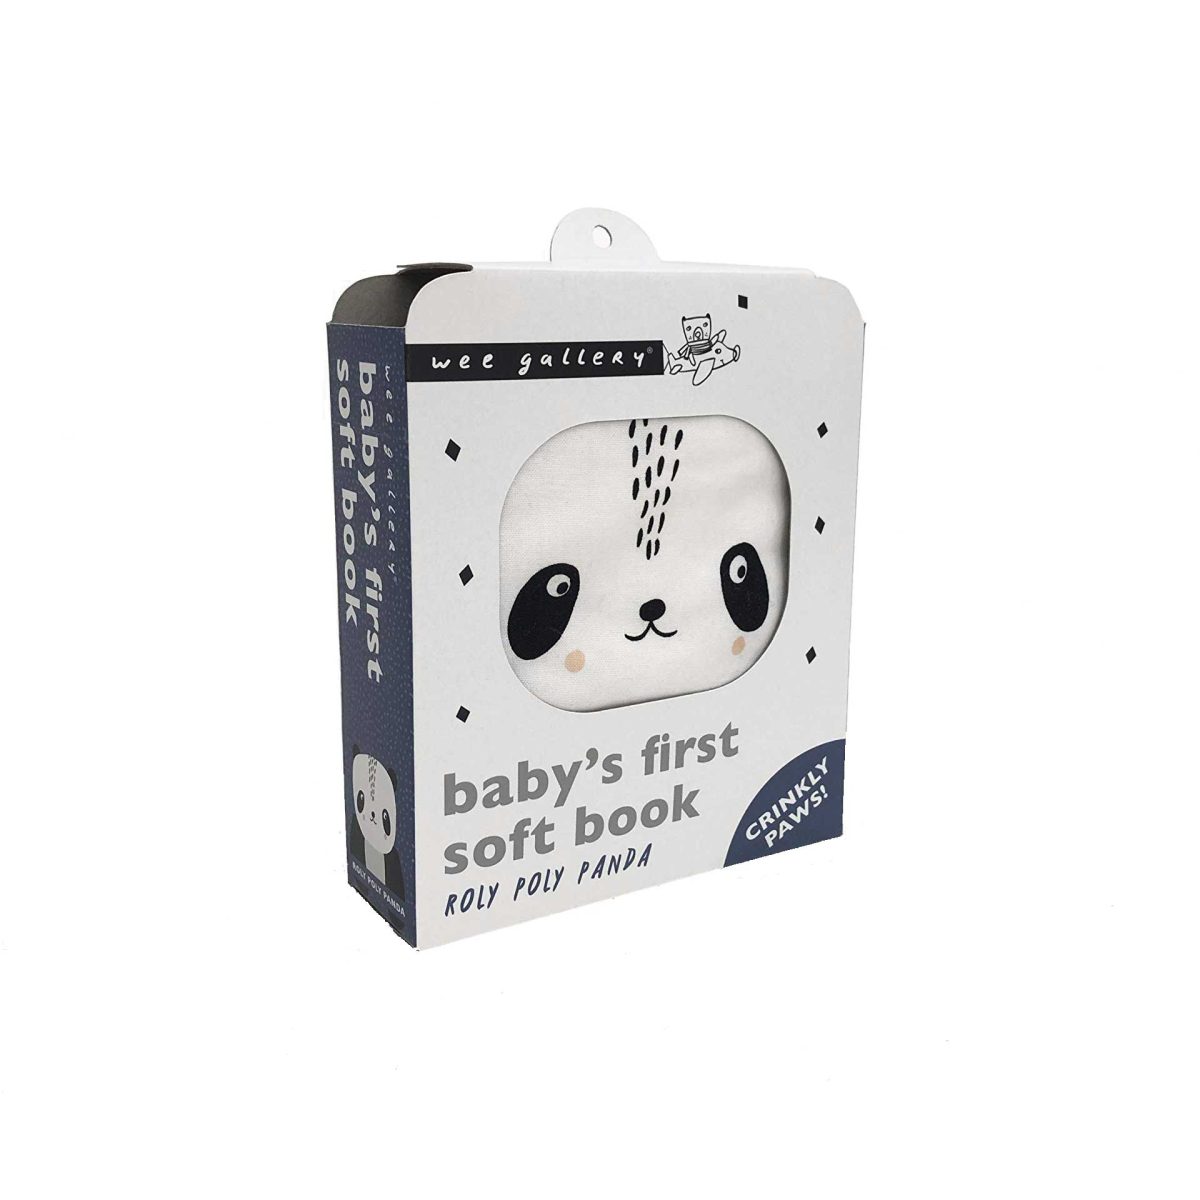 Wee Gallery Soft Book Roly Poly Panda